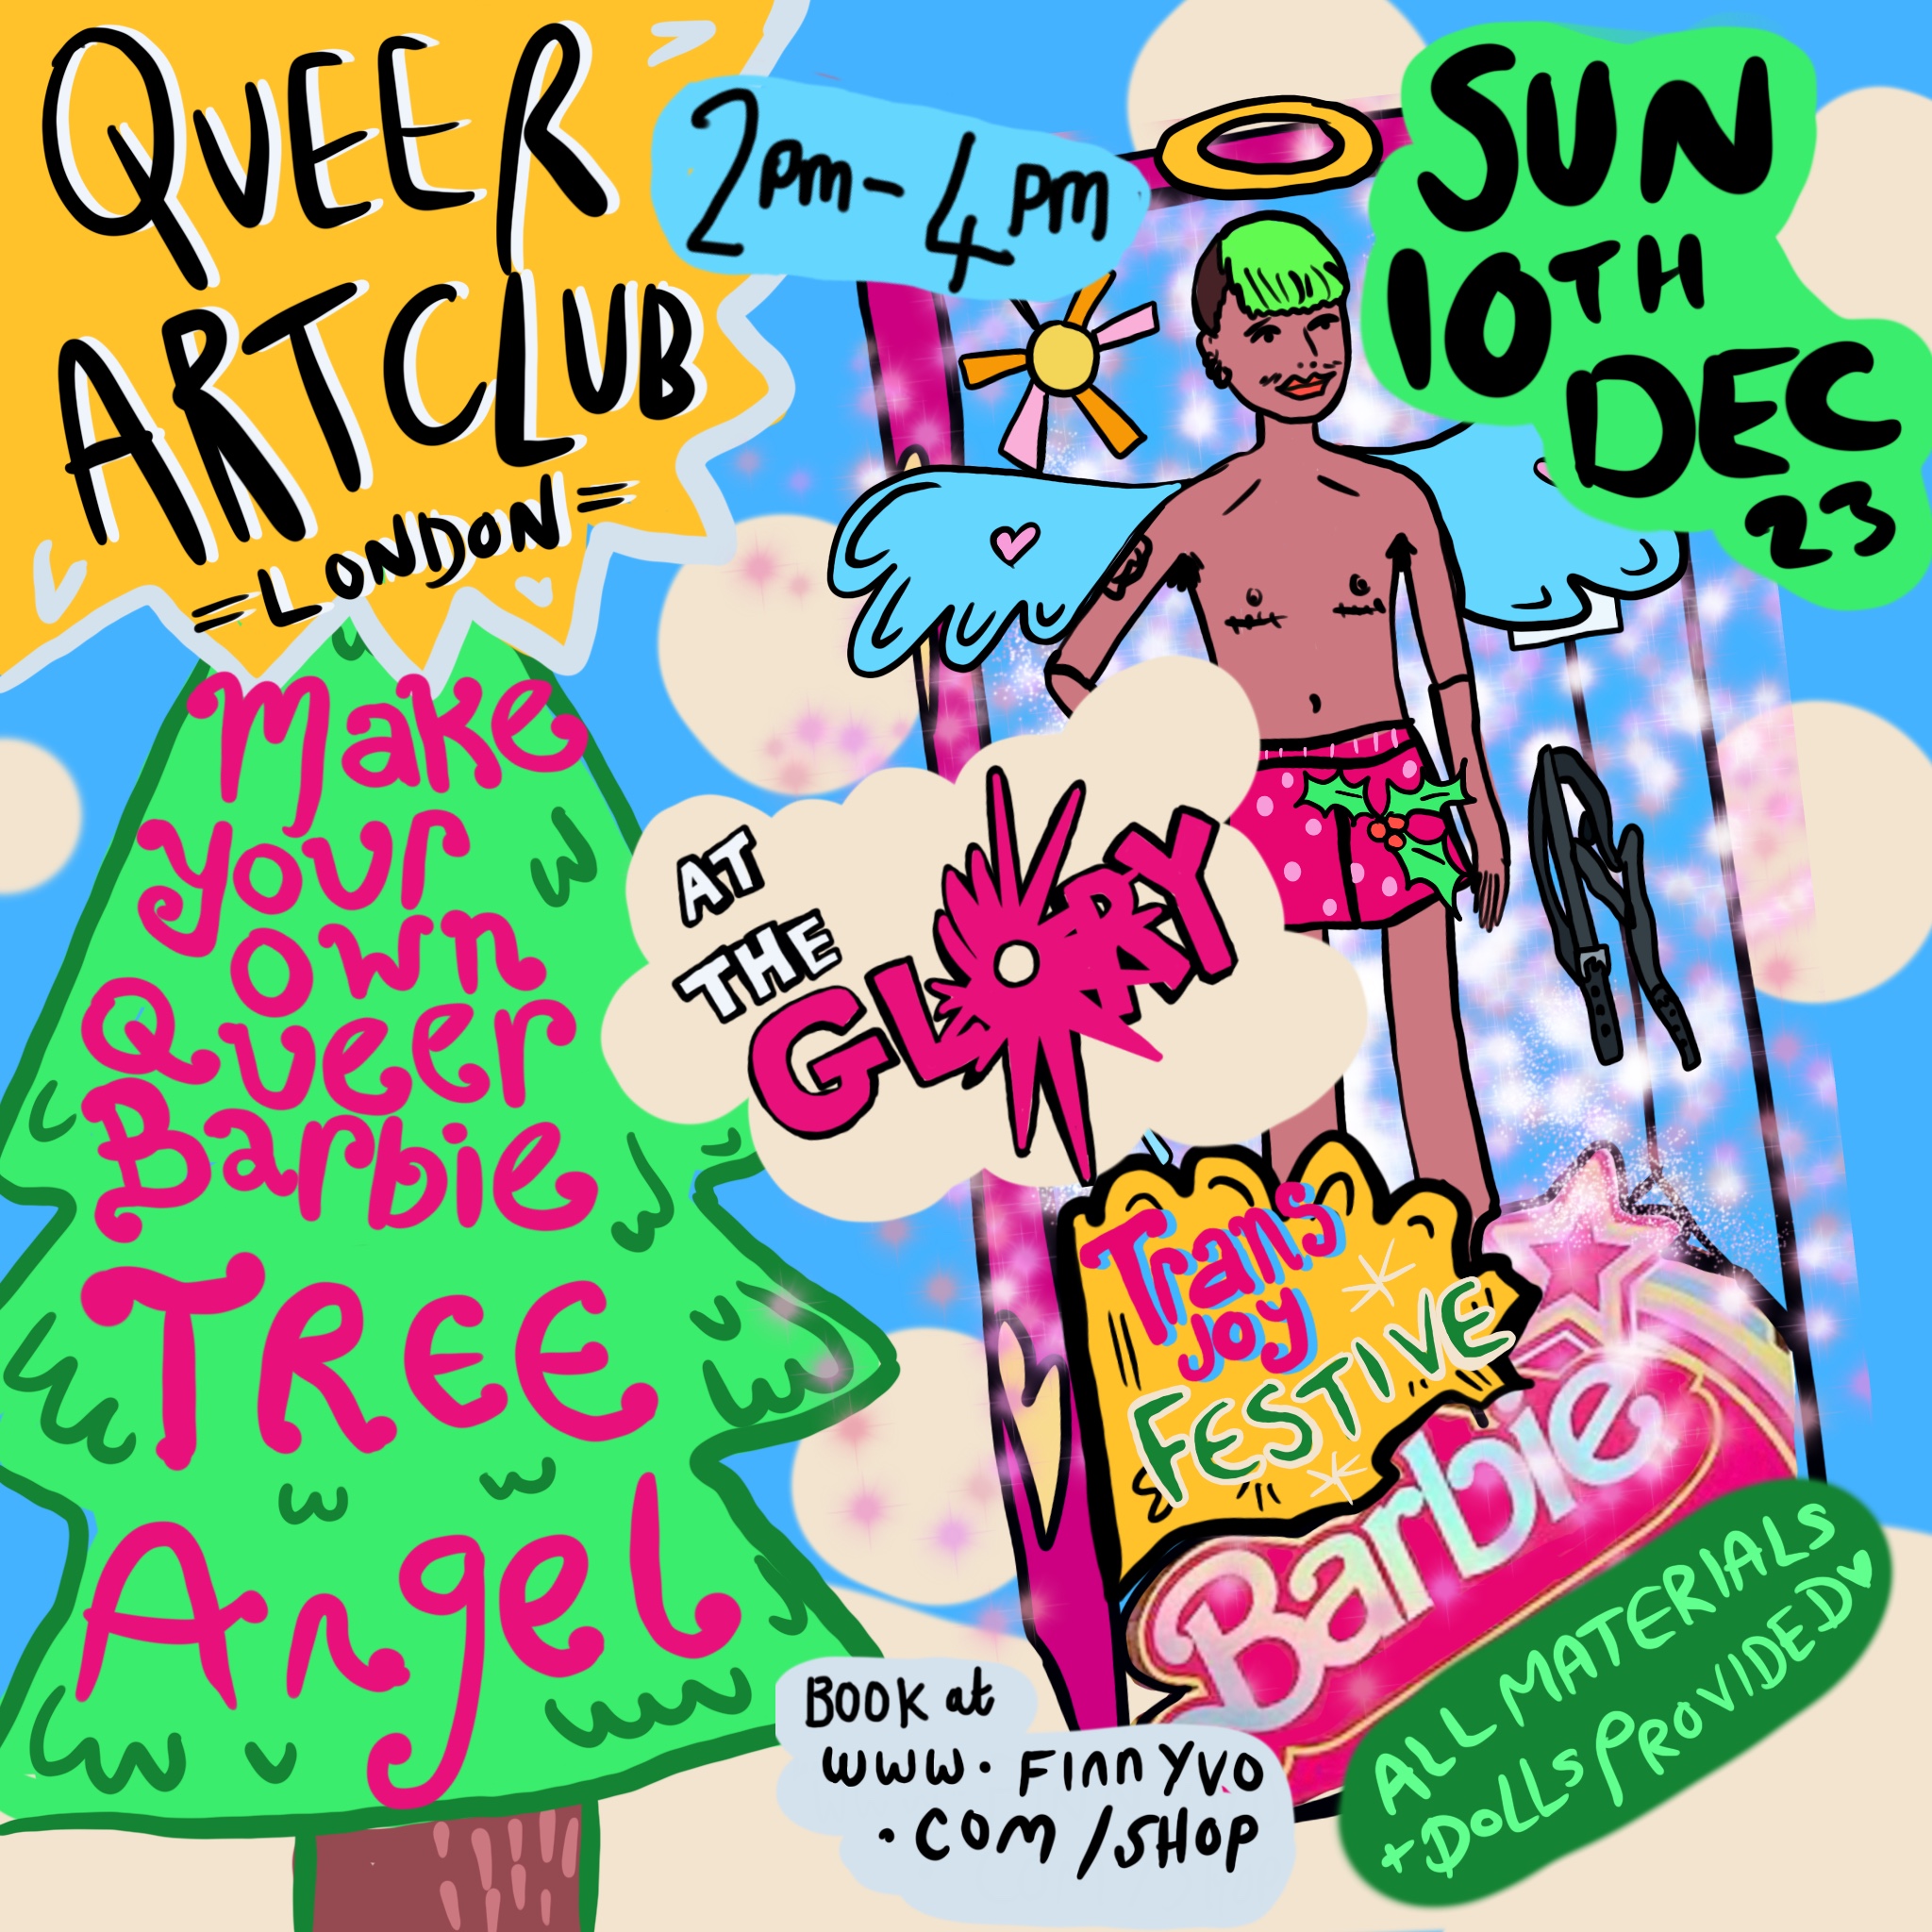 ART: Queer Art Club with Finn Yvo – Queer Your Own Barbie Tree Angel